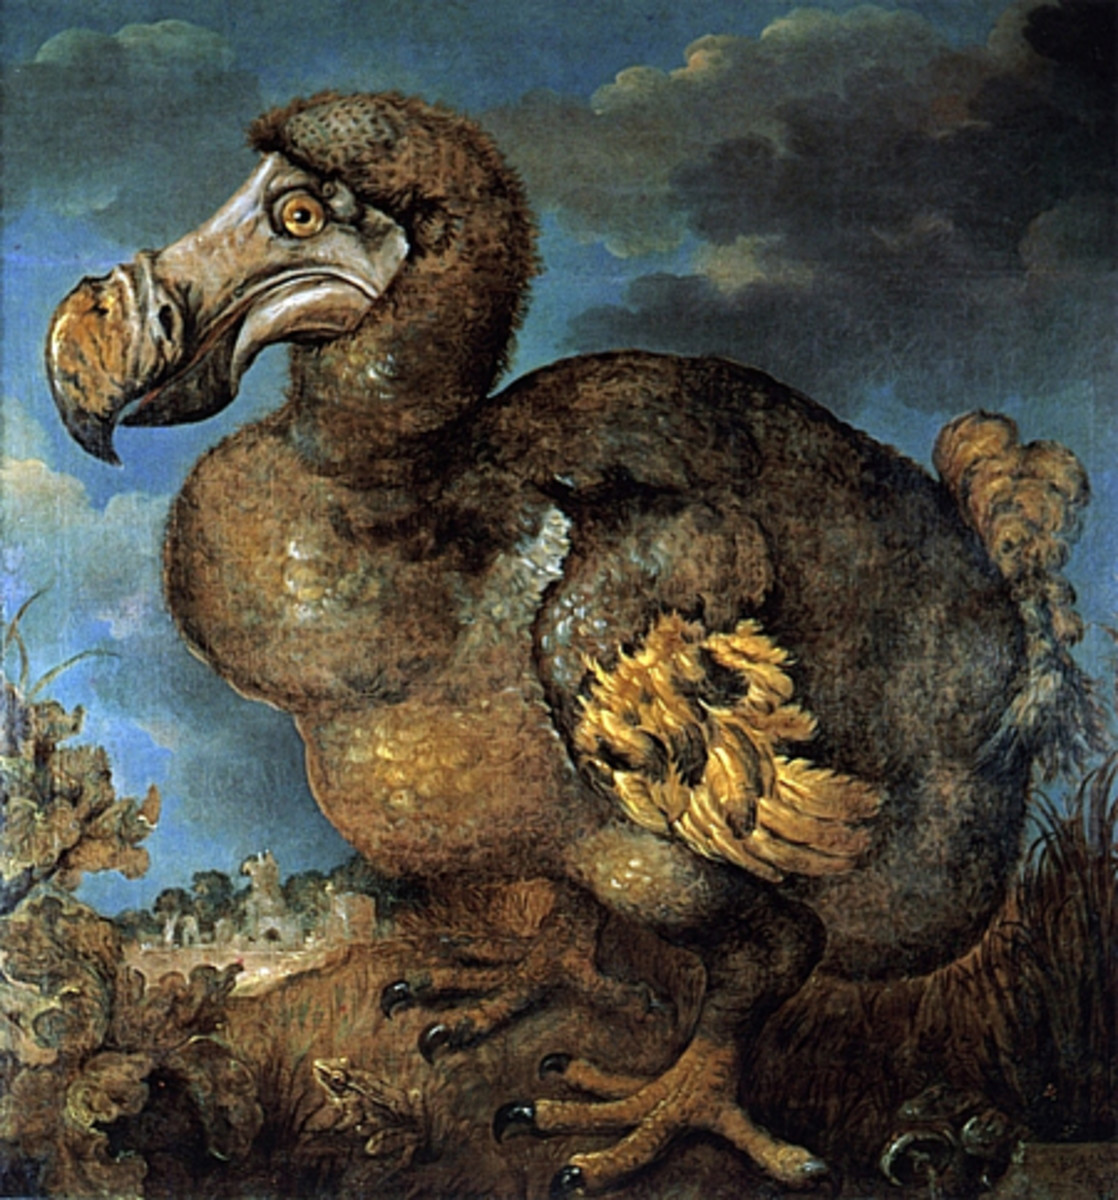 Around three feet tall and flightless, monkeys, cats and rats introduced into its habitat by man killed off the dodo.